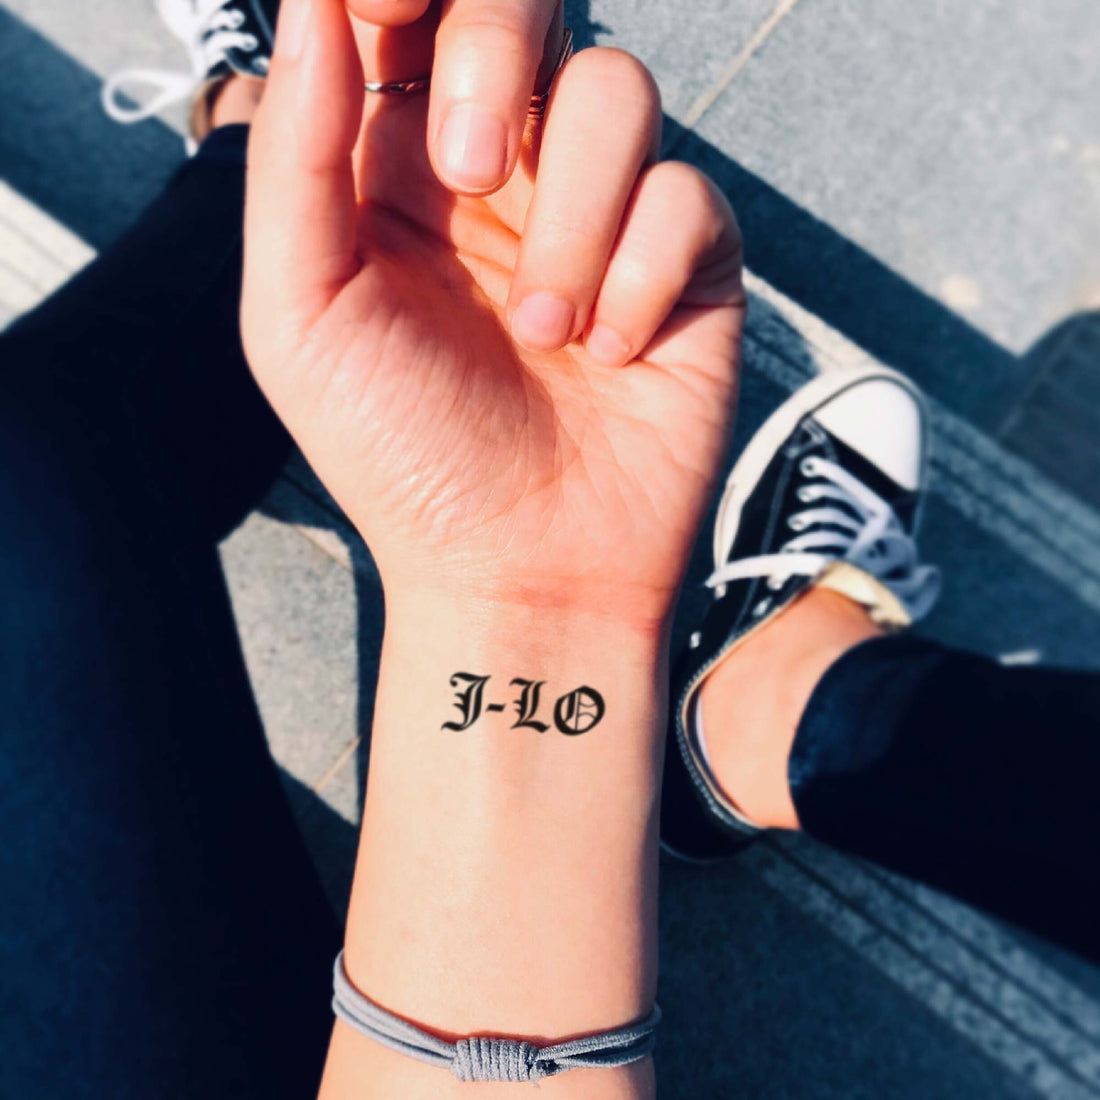 Jennifer Lopez J Lo custom temporary tattoo sticker design idea inspiration meanings removal arm wrist hand words font name signature calligraphy lyrics tour concert outfits merch accessory gift souvenir costumes wear dress up code